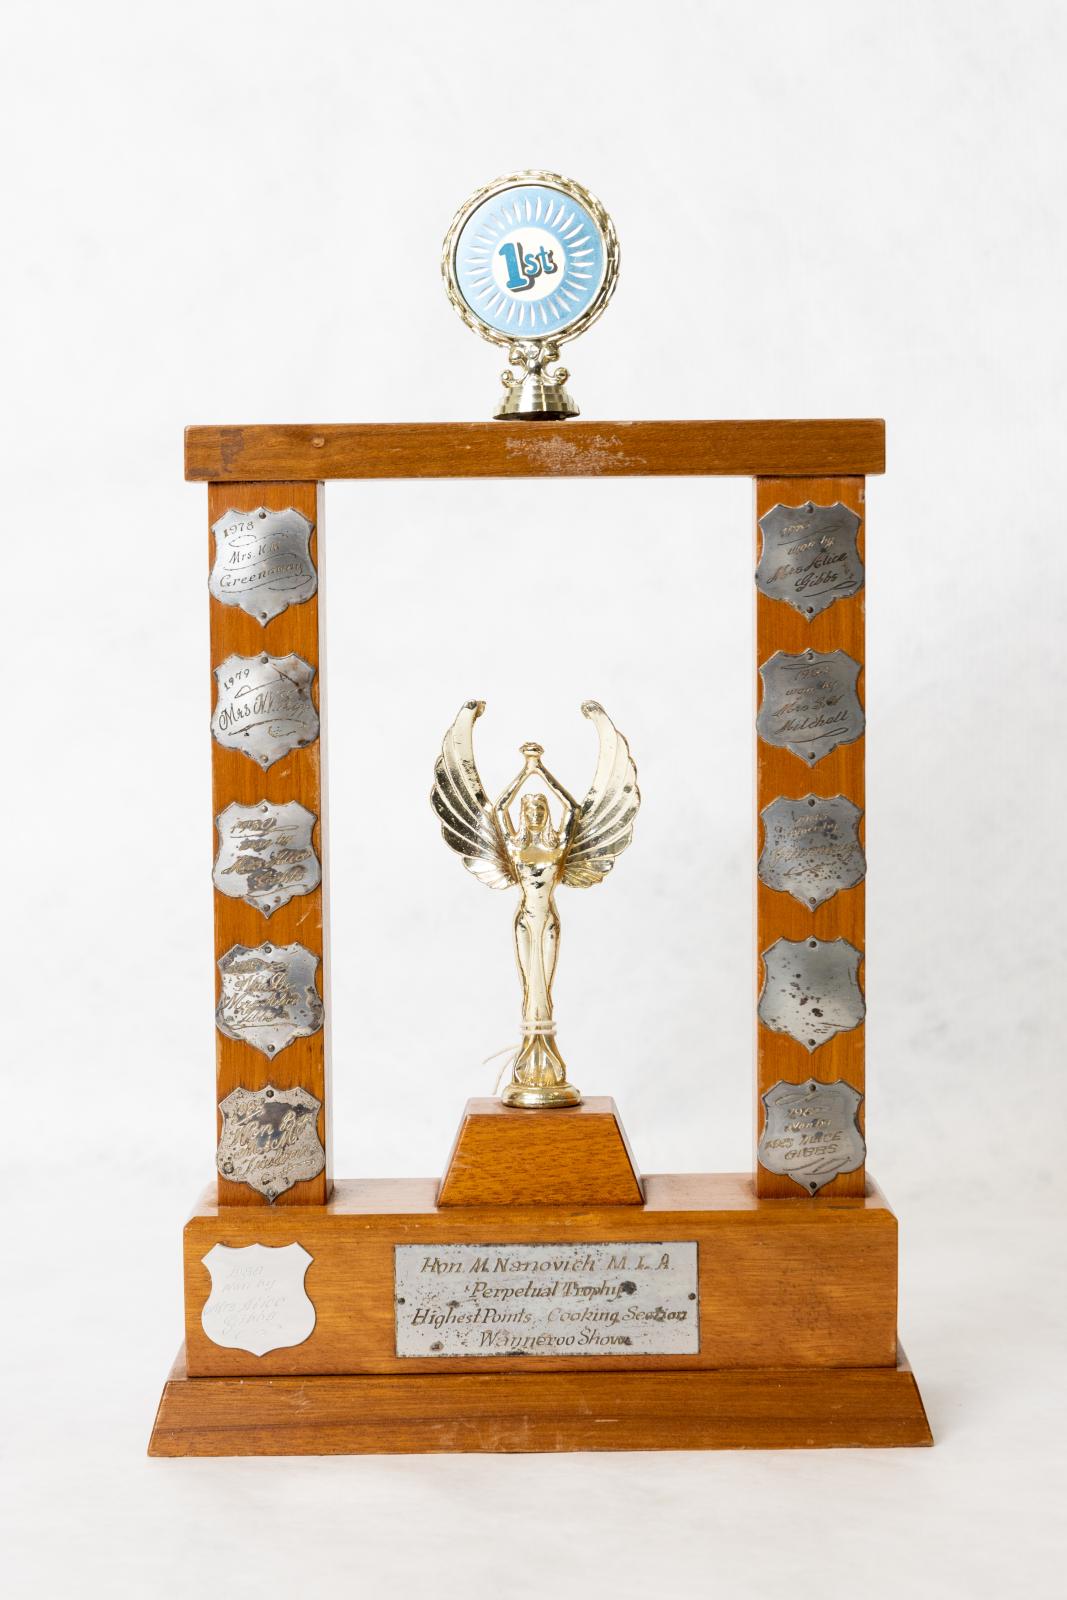 A rectangular shaped trophy, with a column on the left hand and right hand sides with a cross bar on the top. The top cross bar has a small circular medal with 1st written in blue in the centre. Attached to the base, between the two upright wooden posts sits a metal 'angel' styled figurine.